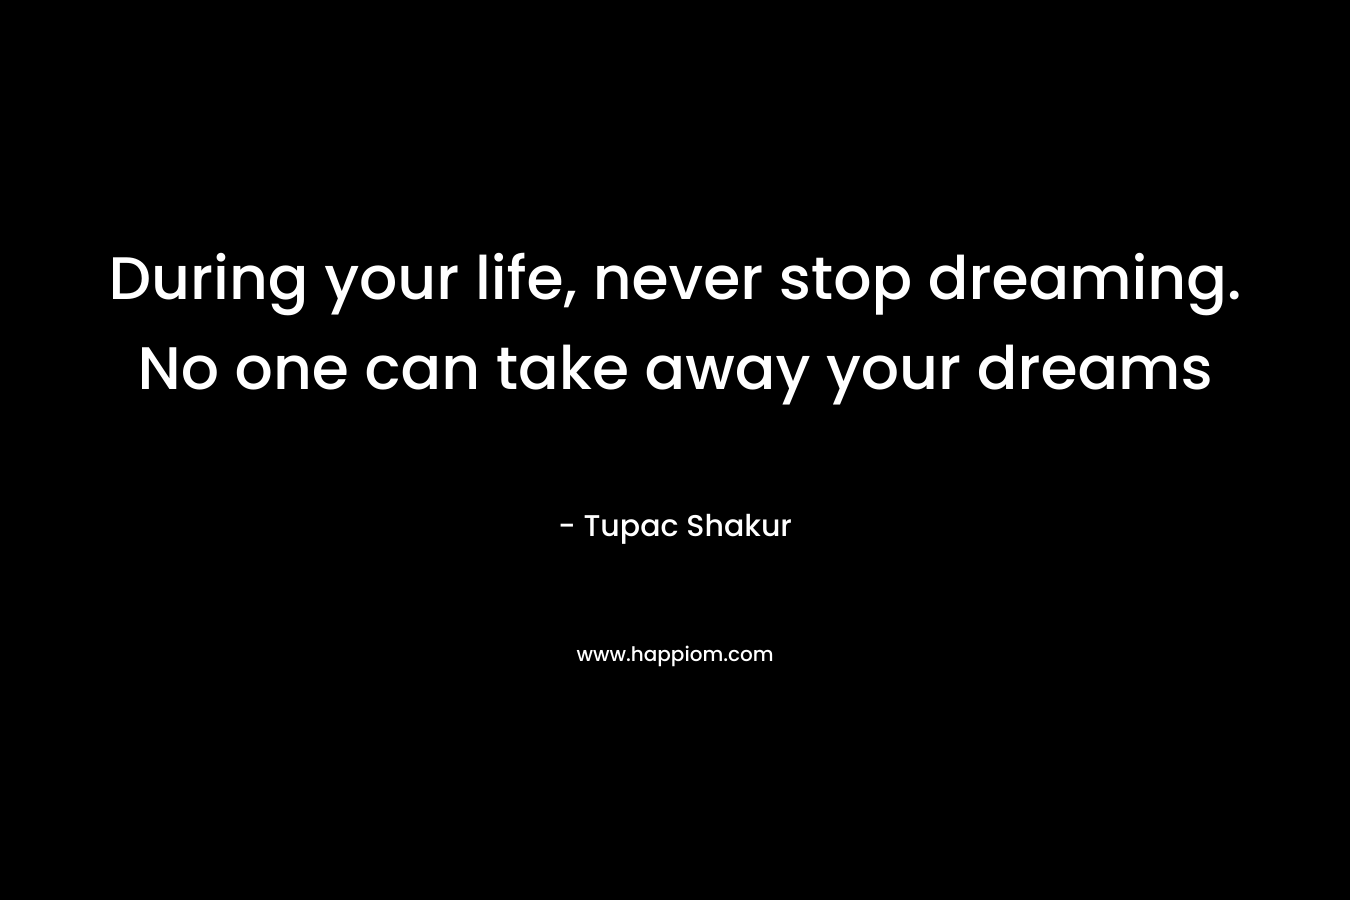 During your life, never stop dreaming. No one can take away your dreams – Tupac Shakur